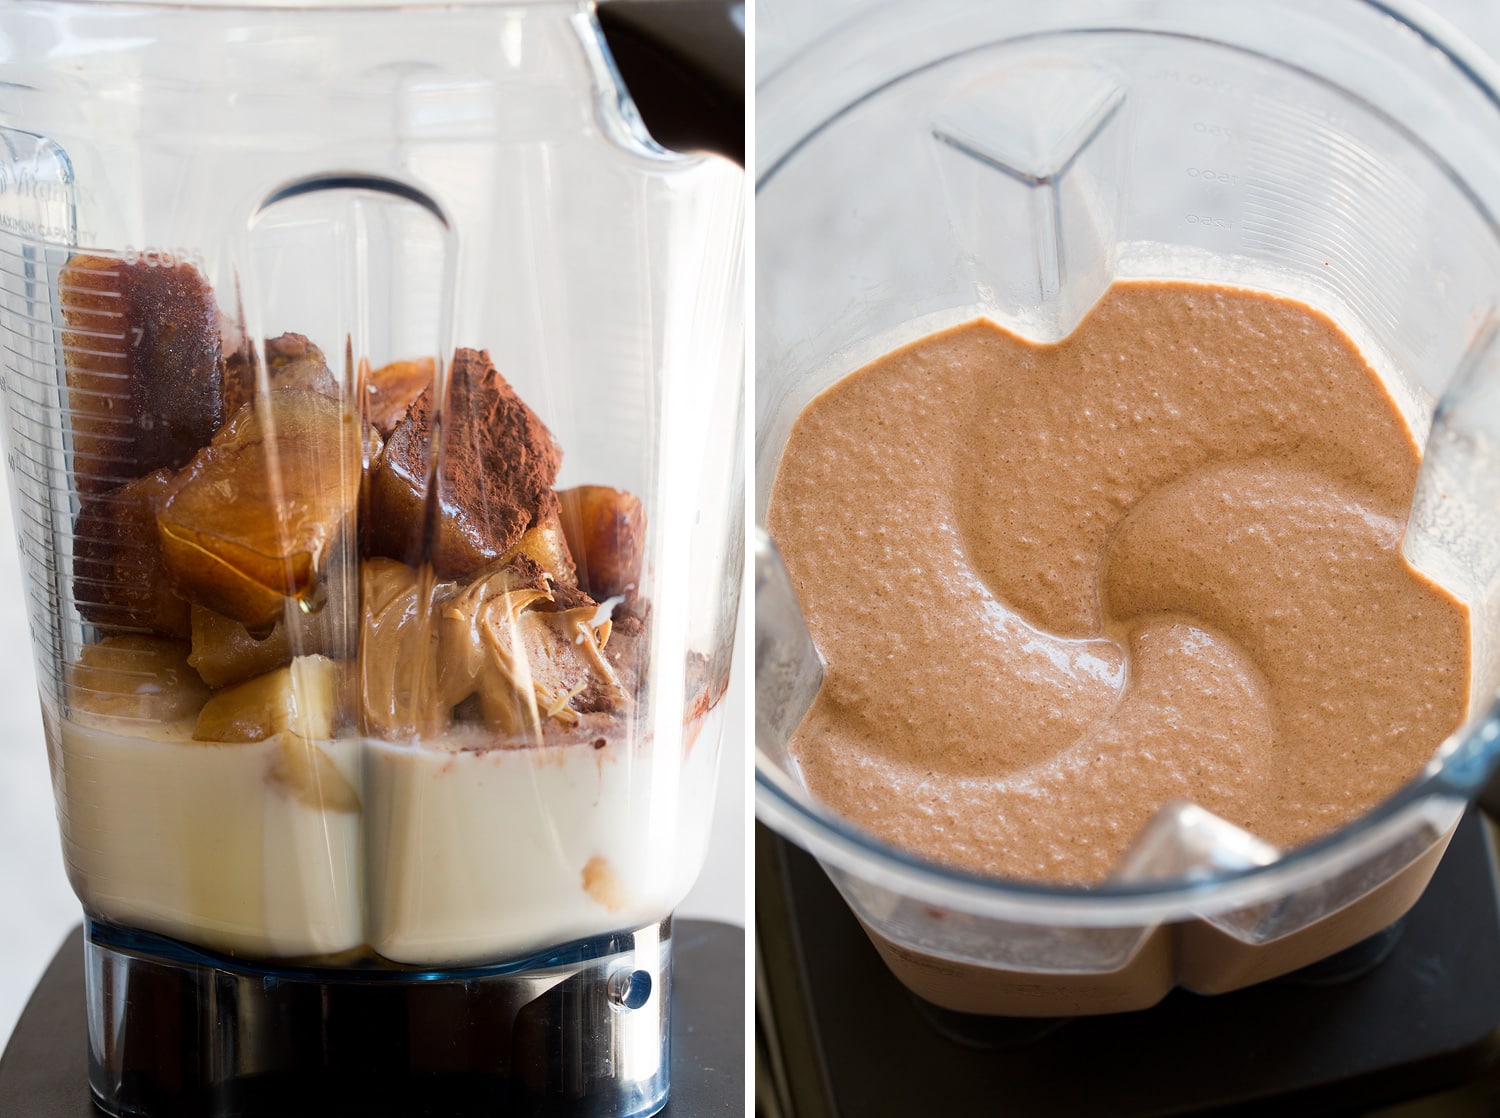 Coffee smoothie ingredients in blender before and after blending.